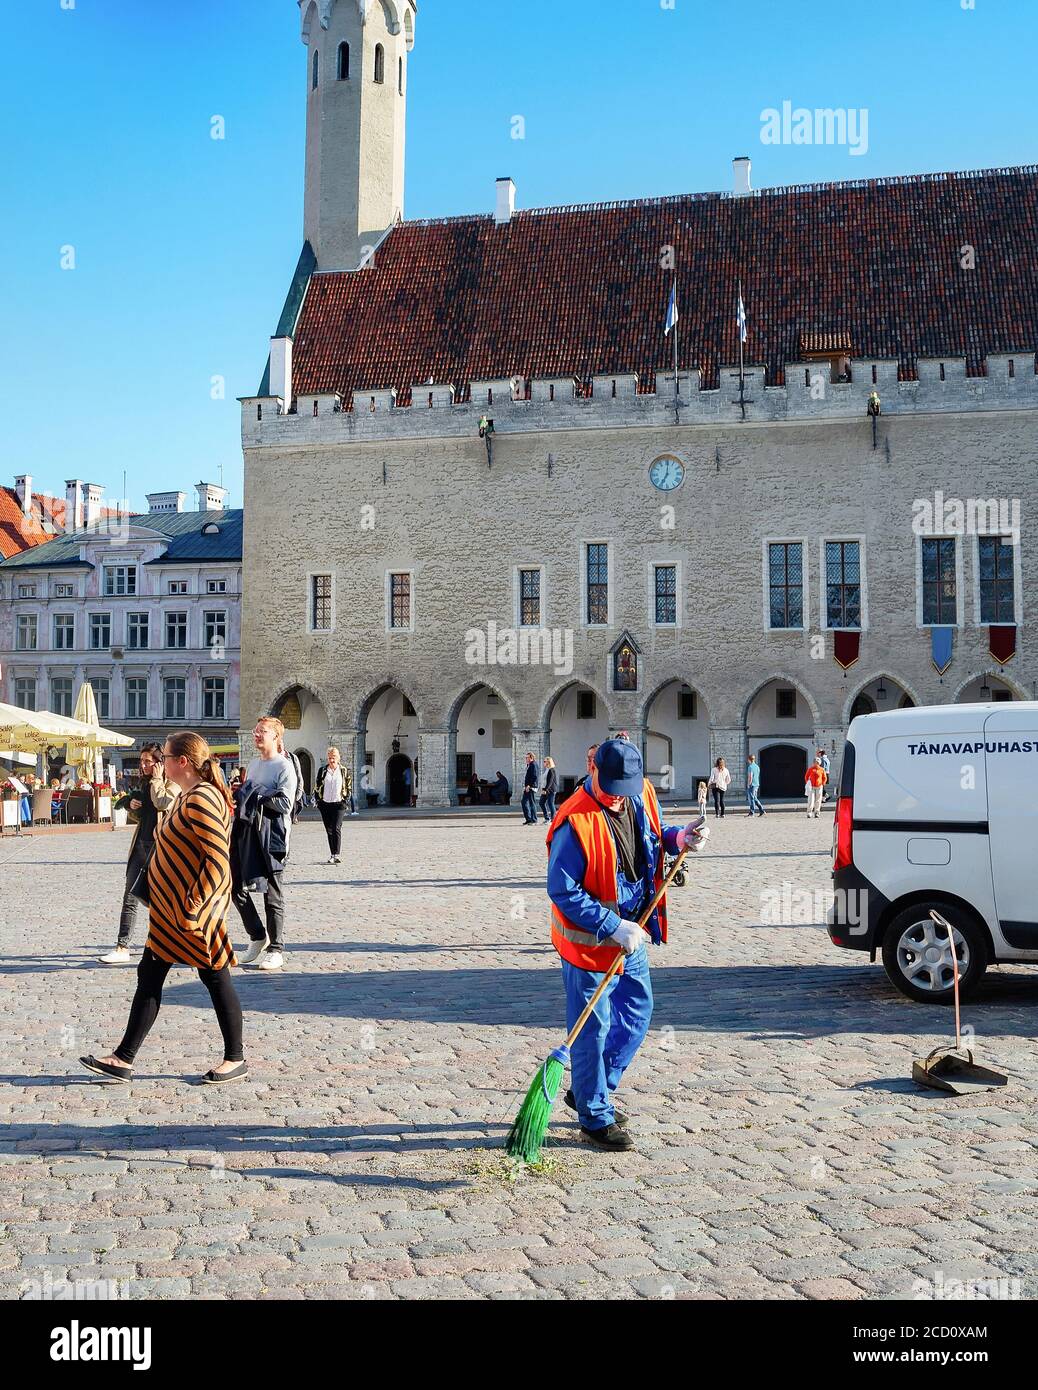 TALLINN, ESTONIA - JULY 14, 2019: Man sweeping central Town Hall Square, walking tourists, old town cityscape in bright sunlight Stock Photo